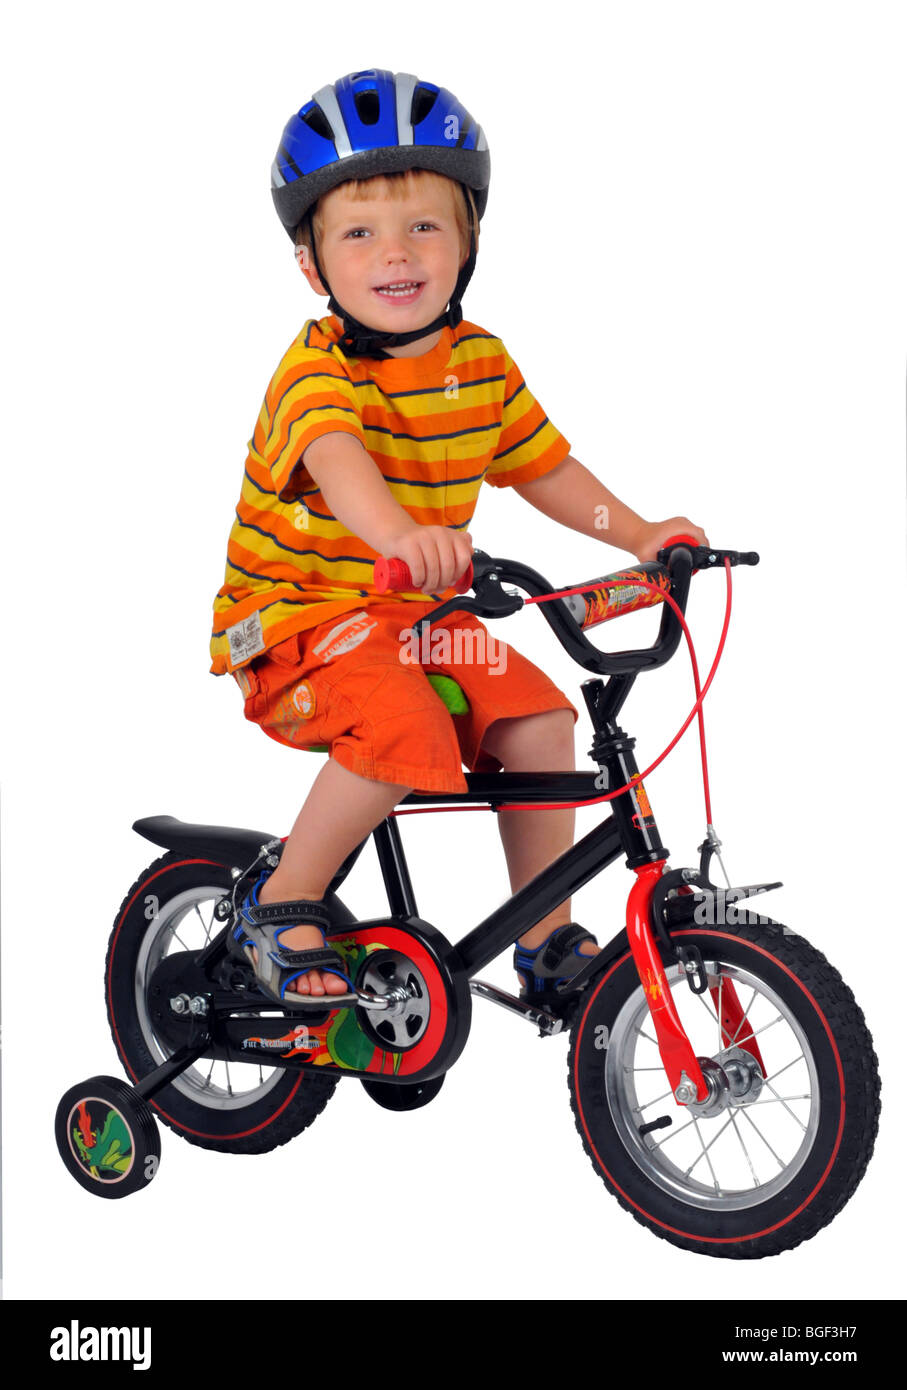 Boy on a bicycle with stabilisers, bike with stabilizer, child learning to ride a bike with stabilizers, learn to cycle Stock Photo